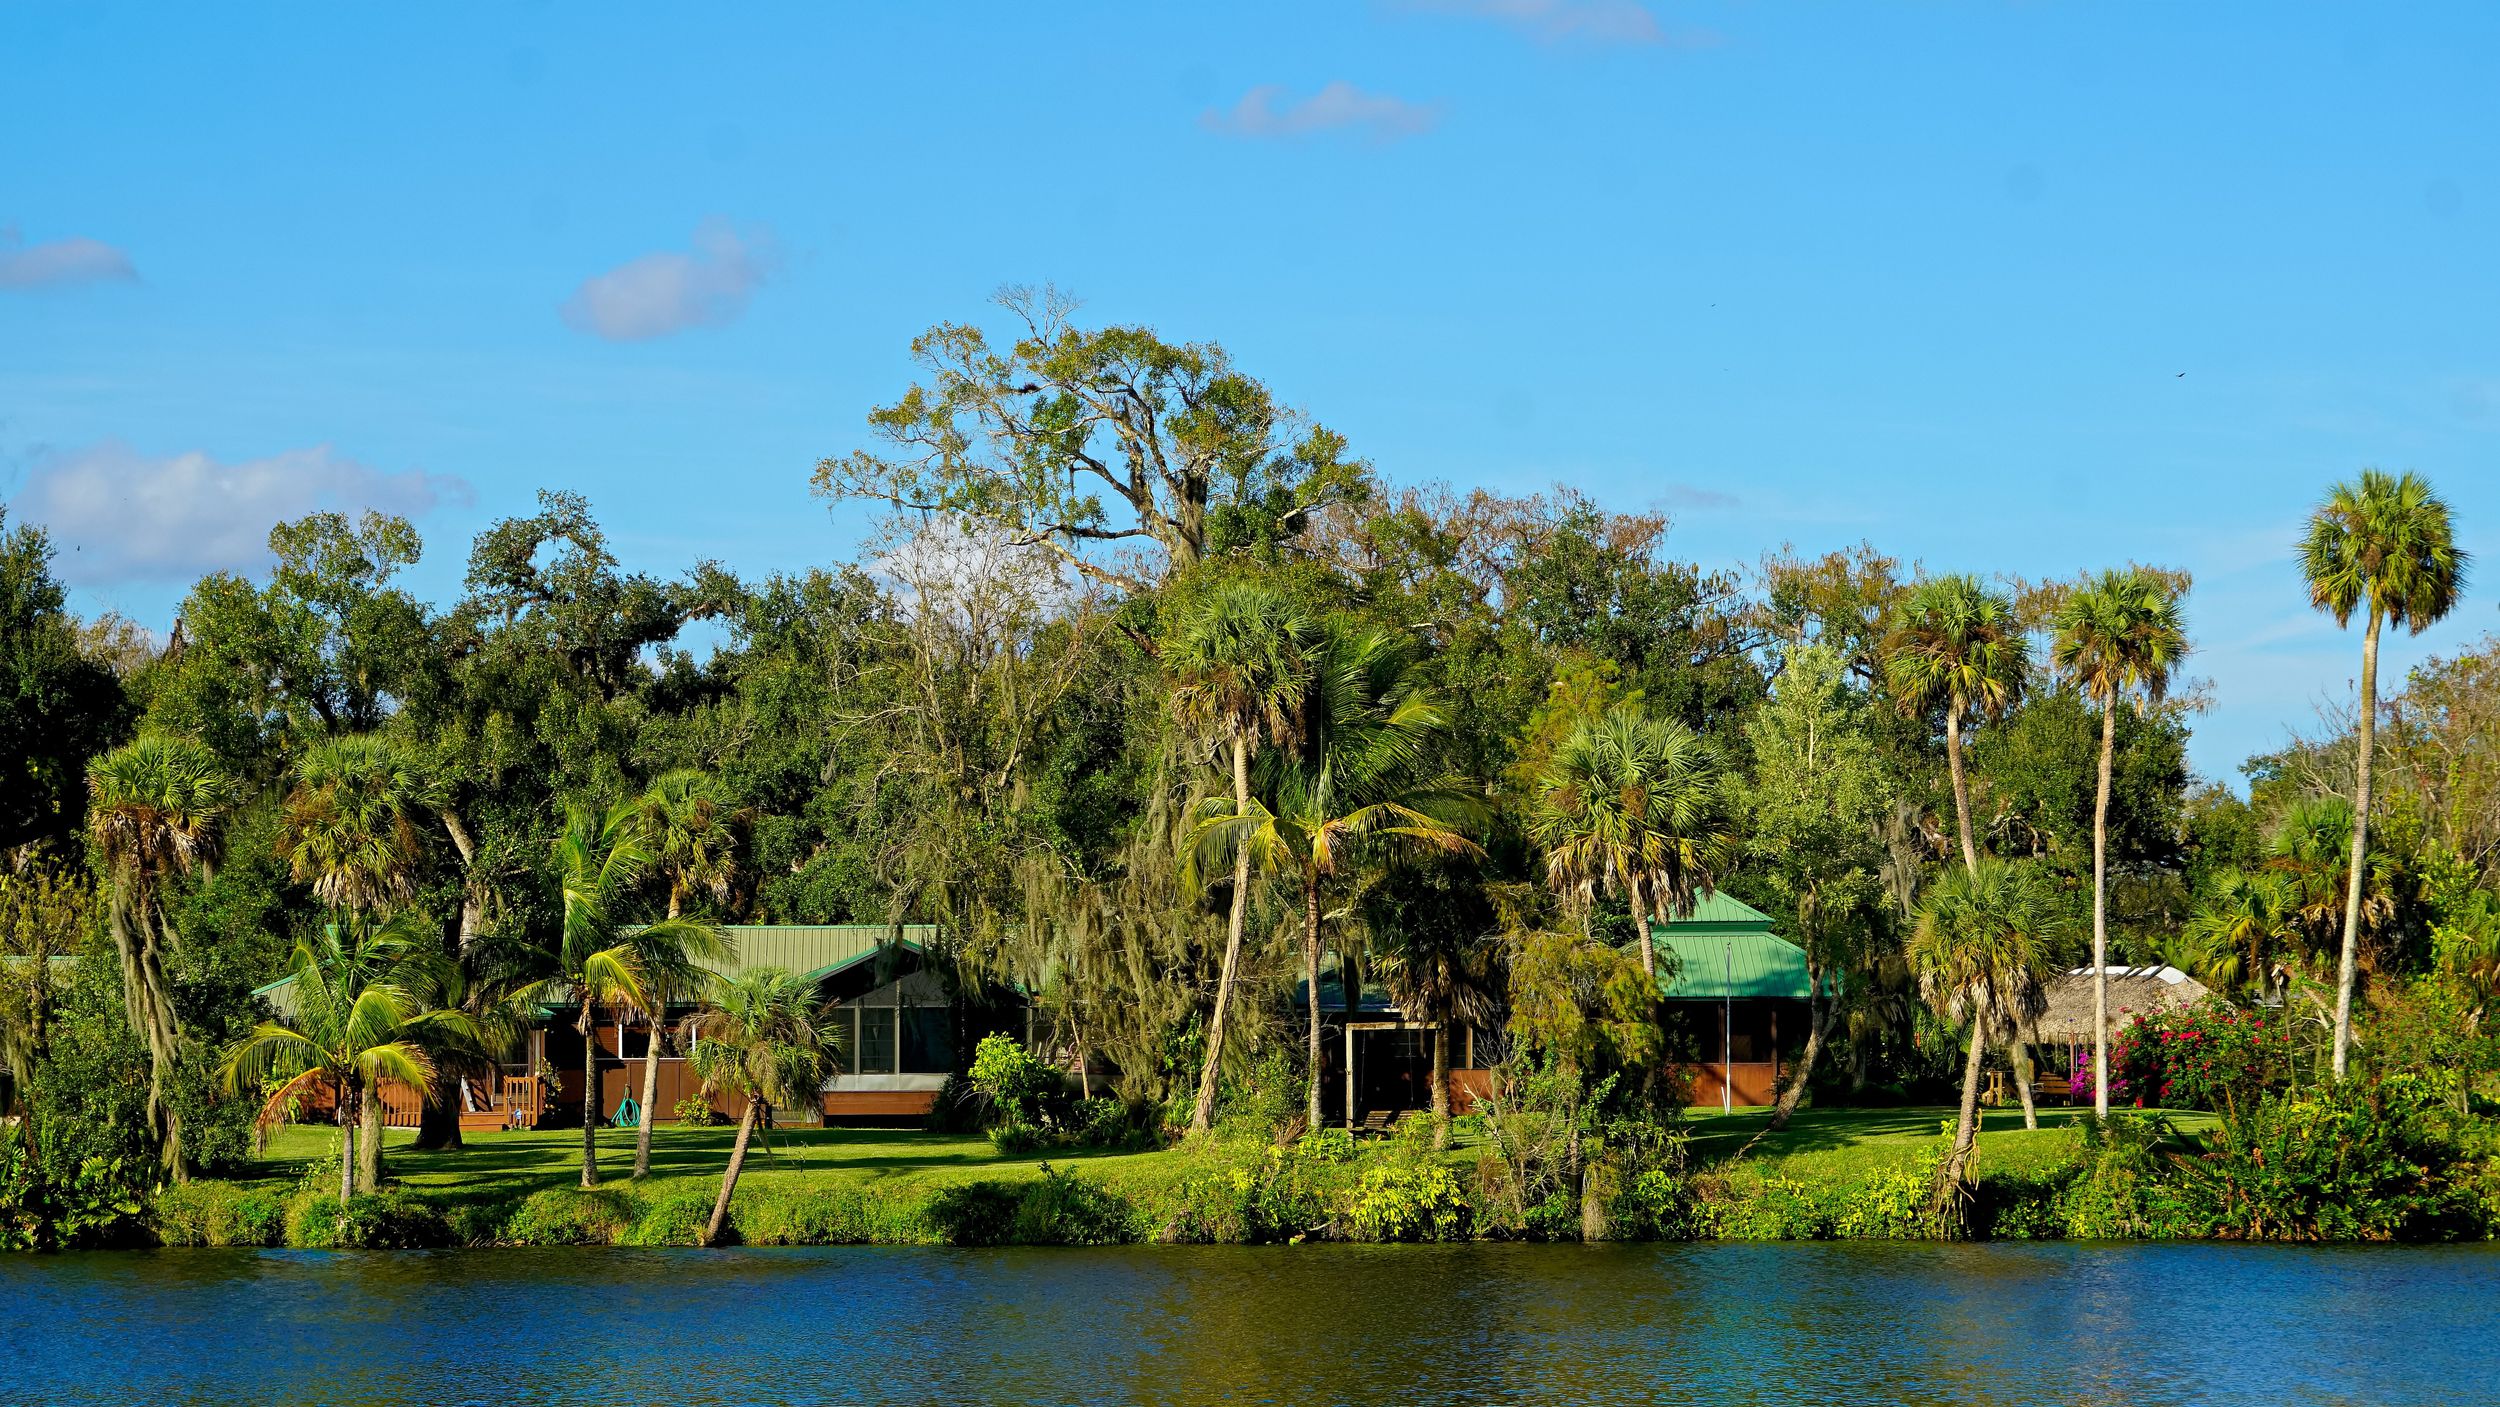 Waterfront homes covered in cypress trees